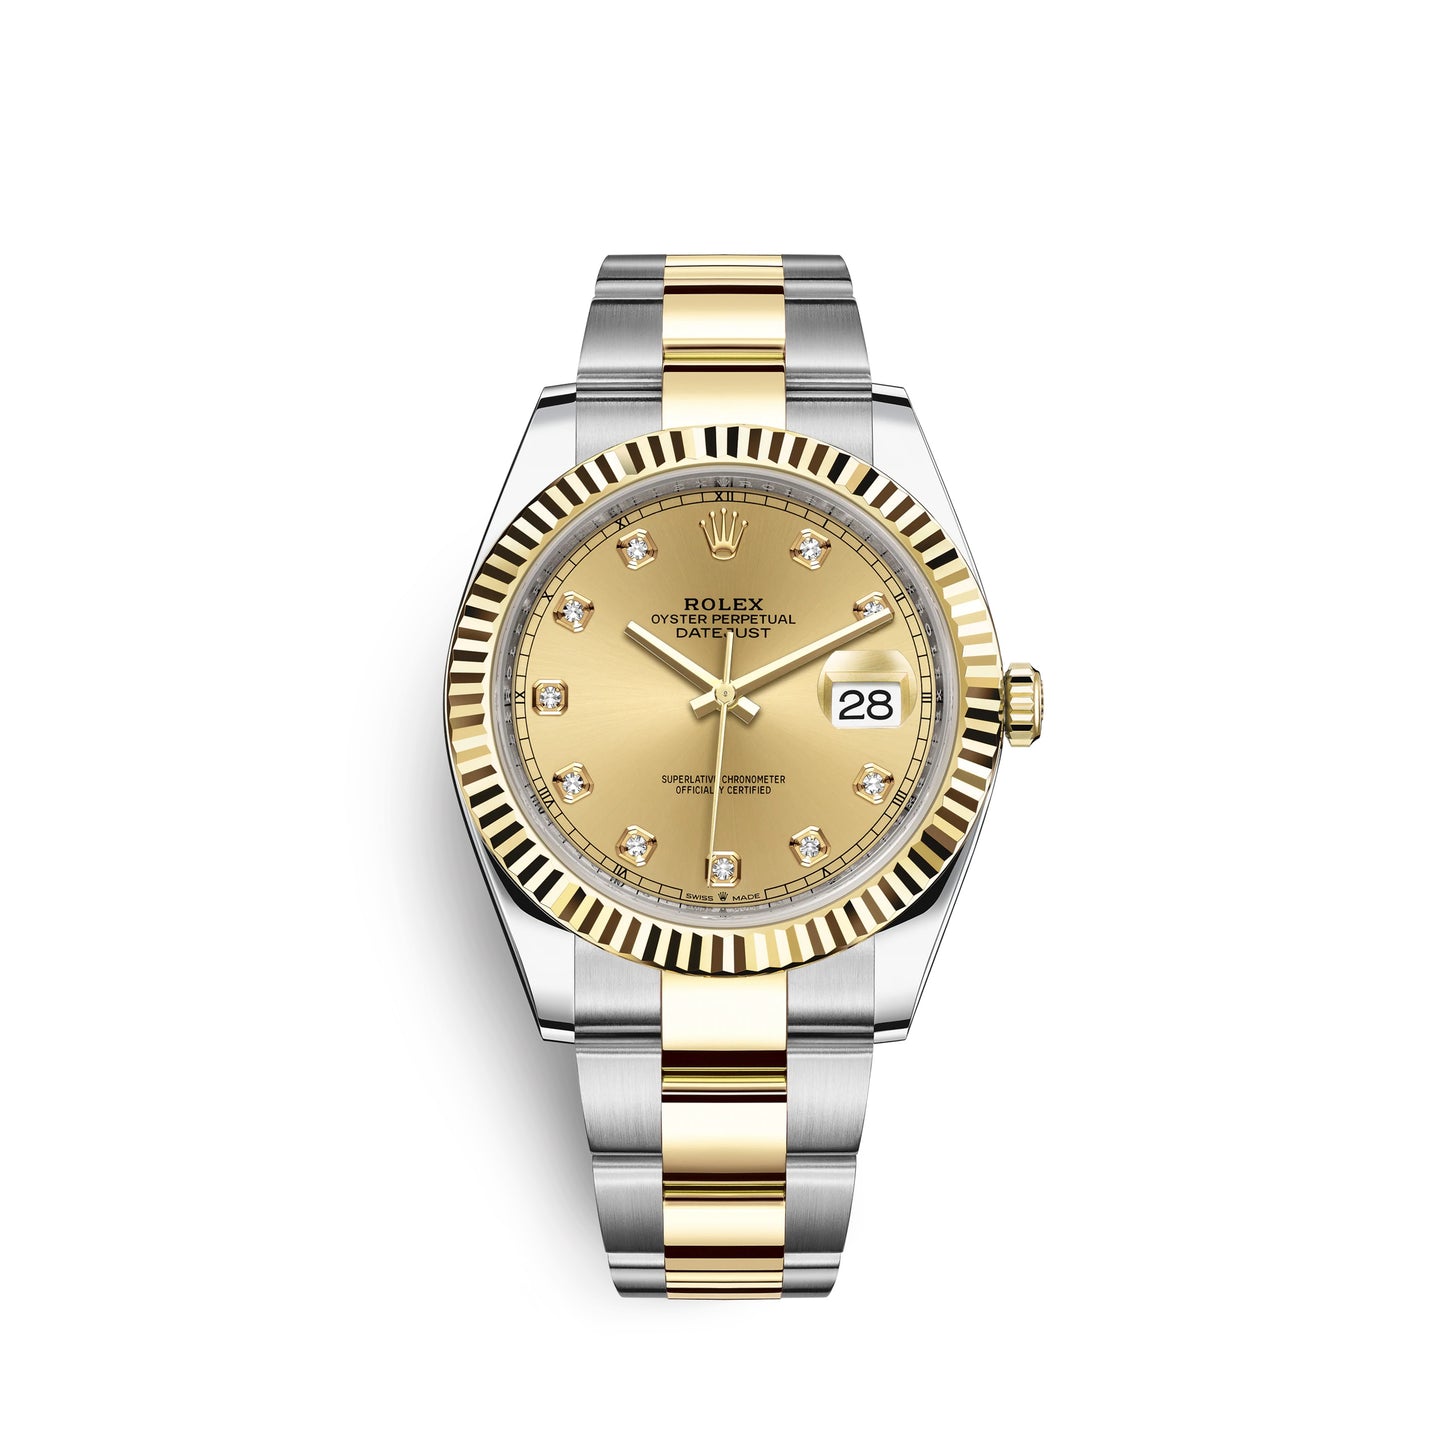 Rolex Datejust 41, 18k Yellow Gold and Stainless Steel, 41mm, Ref# 126333-0011